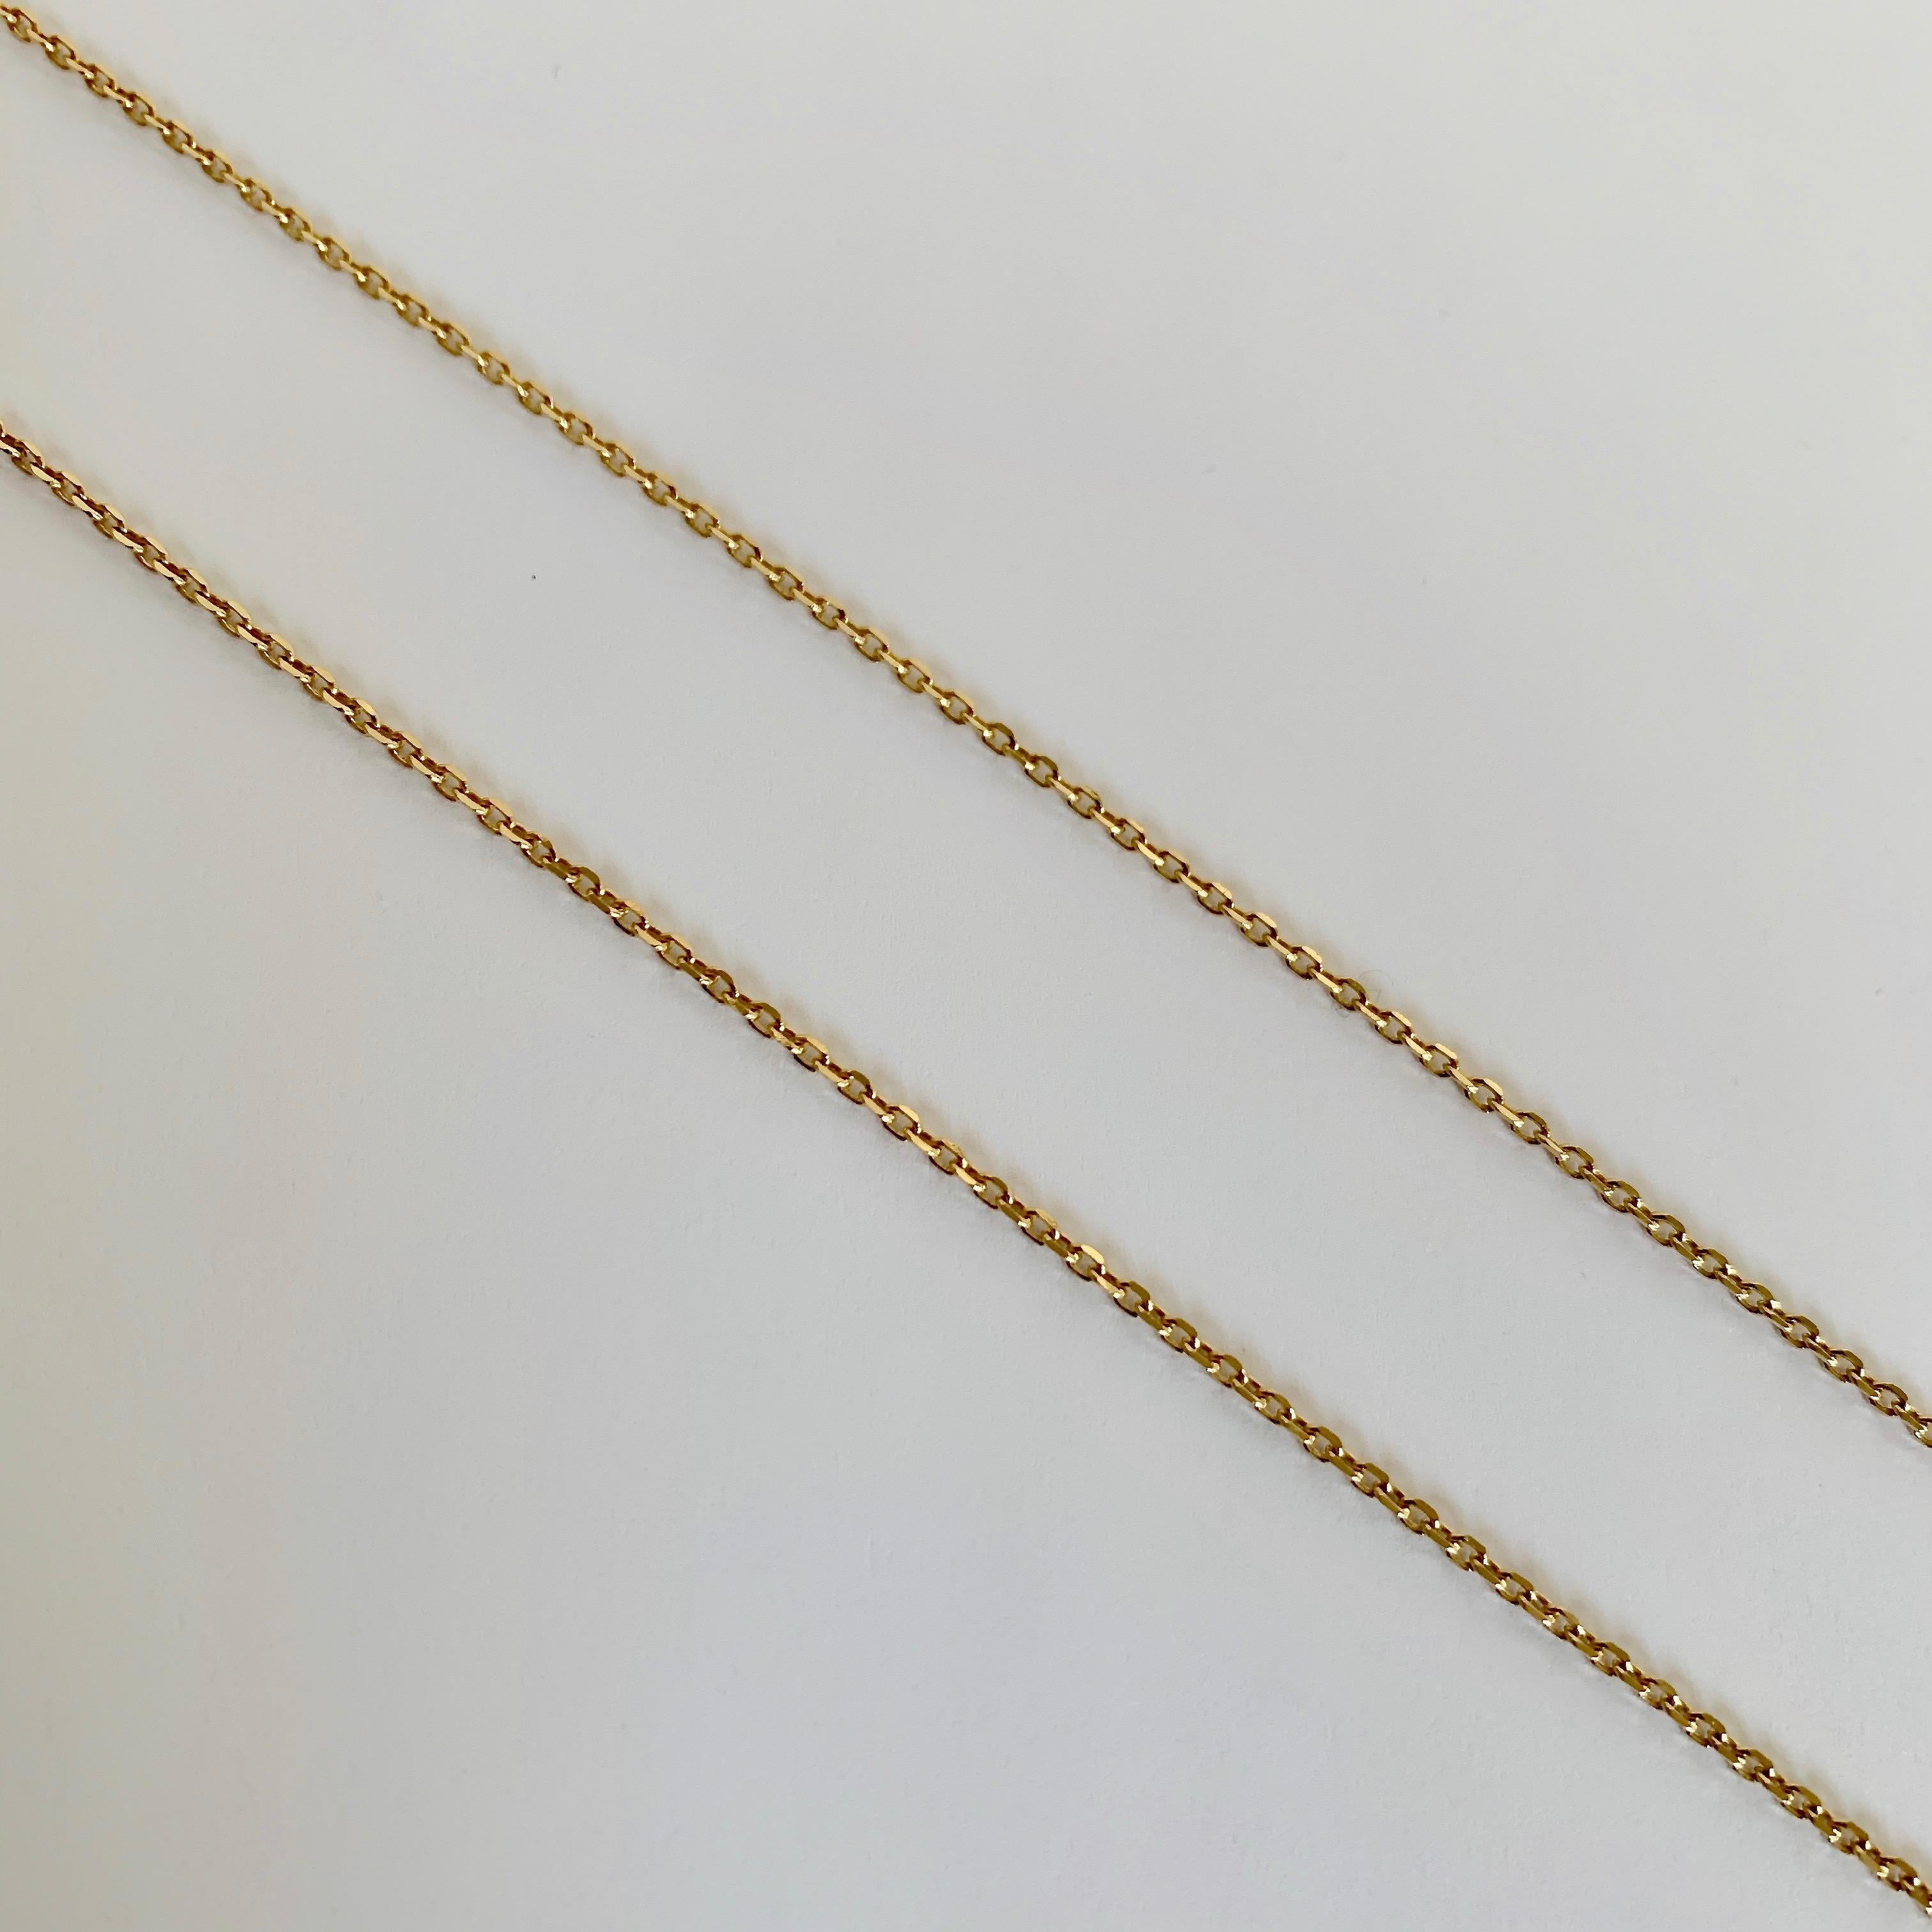 This chain is made of 18 Karat solid yellow gold and it has been hallmarked at London’s Goldsmiths’ Company –  Assay Office.
Ideal to wear with pendants or just on its own.
Weight:  2.95g
Length:  45cm 
Gauge: 1.5mm
All our jewellery are new and